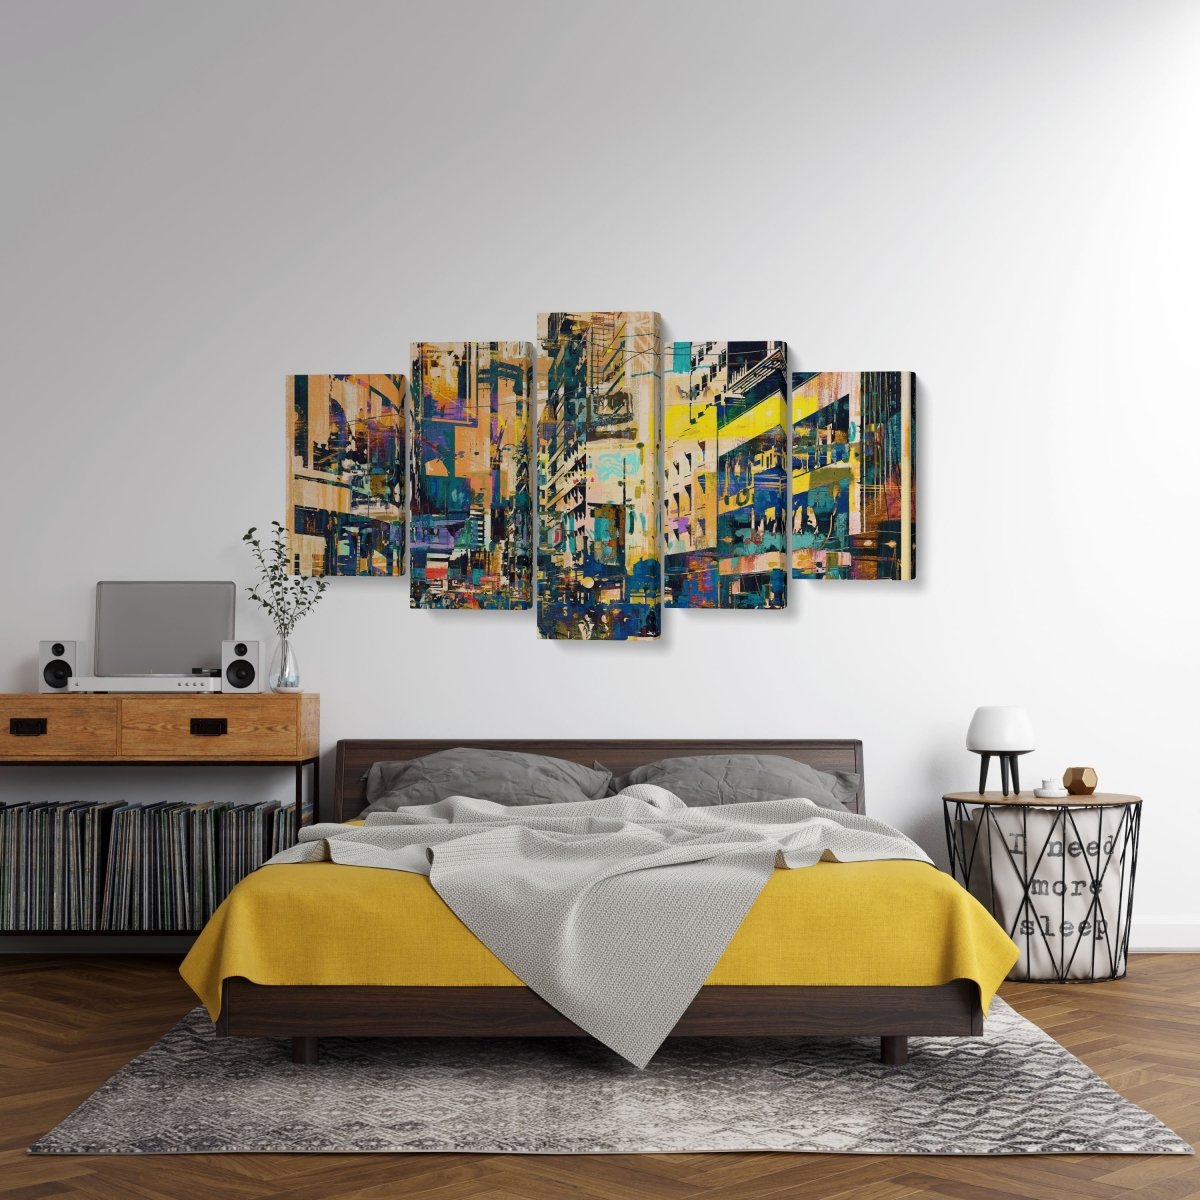 Tablou MultiCanvas 5 piese Abstract Art of Cityscape - clevny.ro